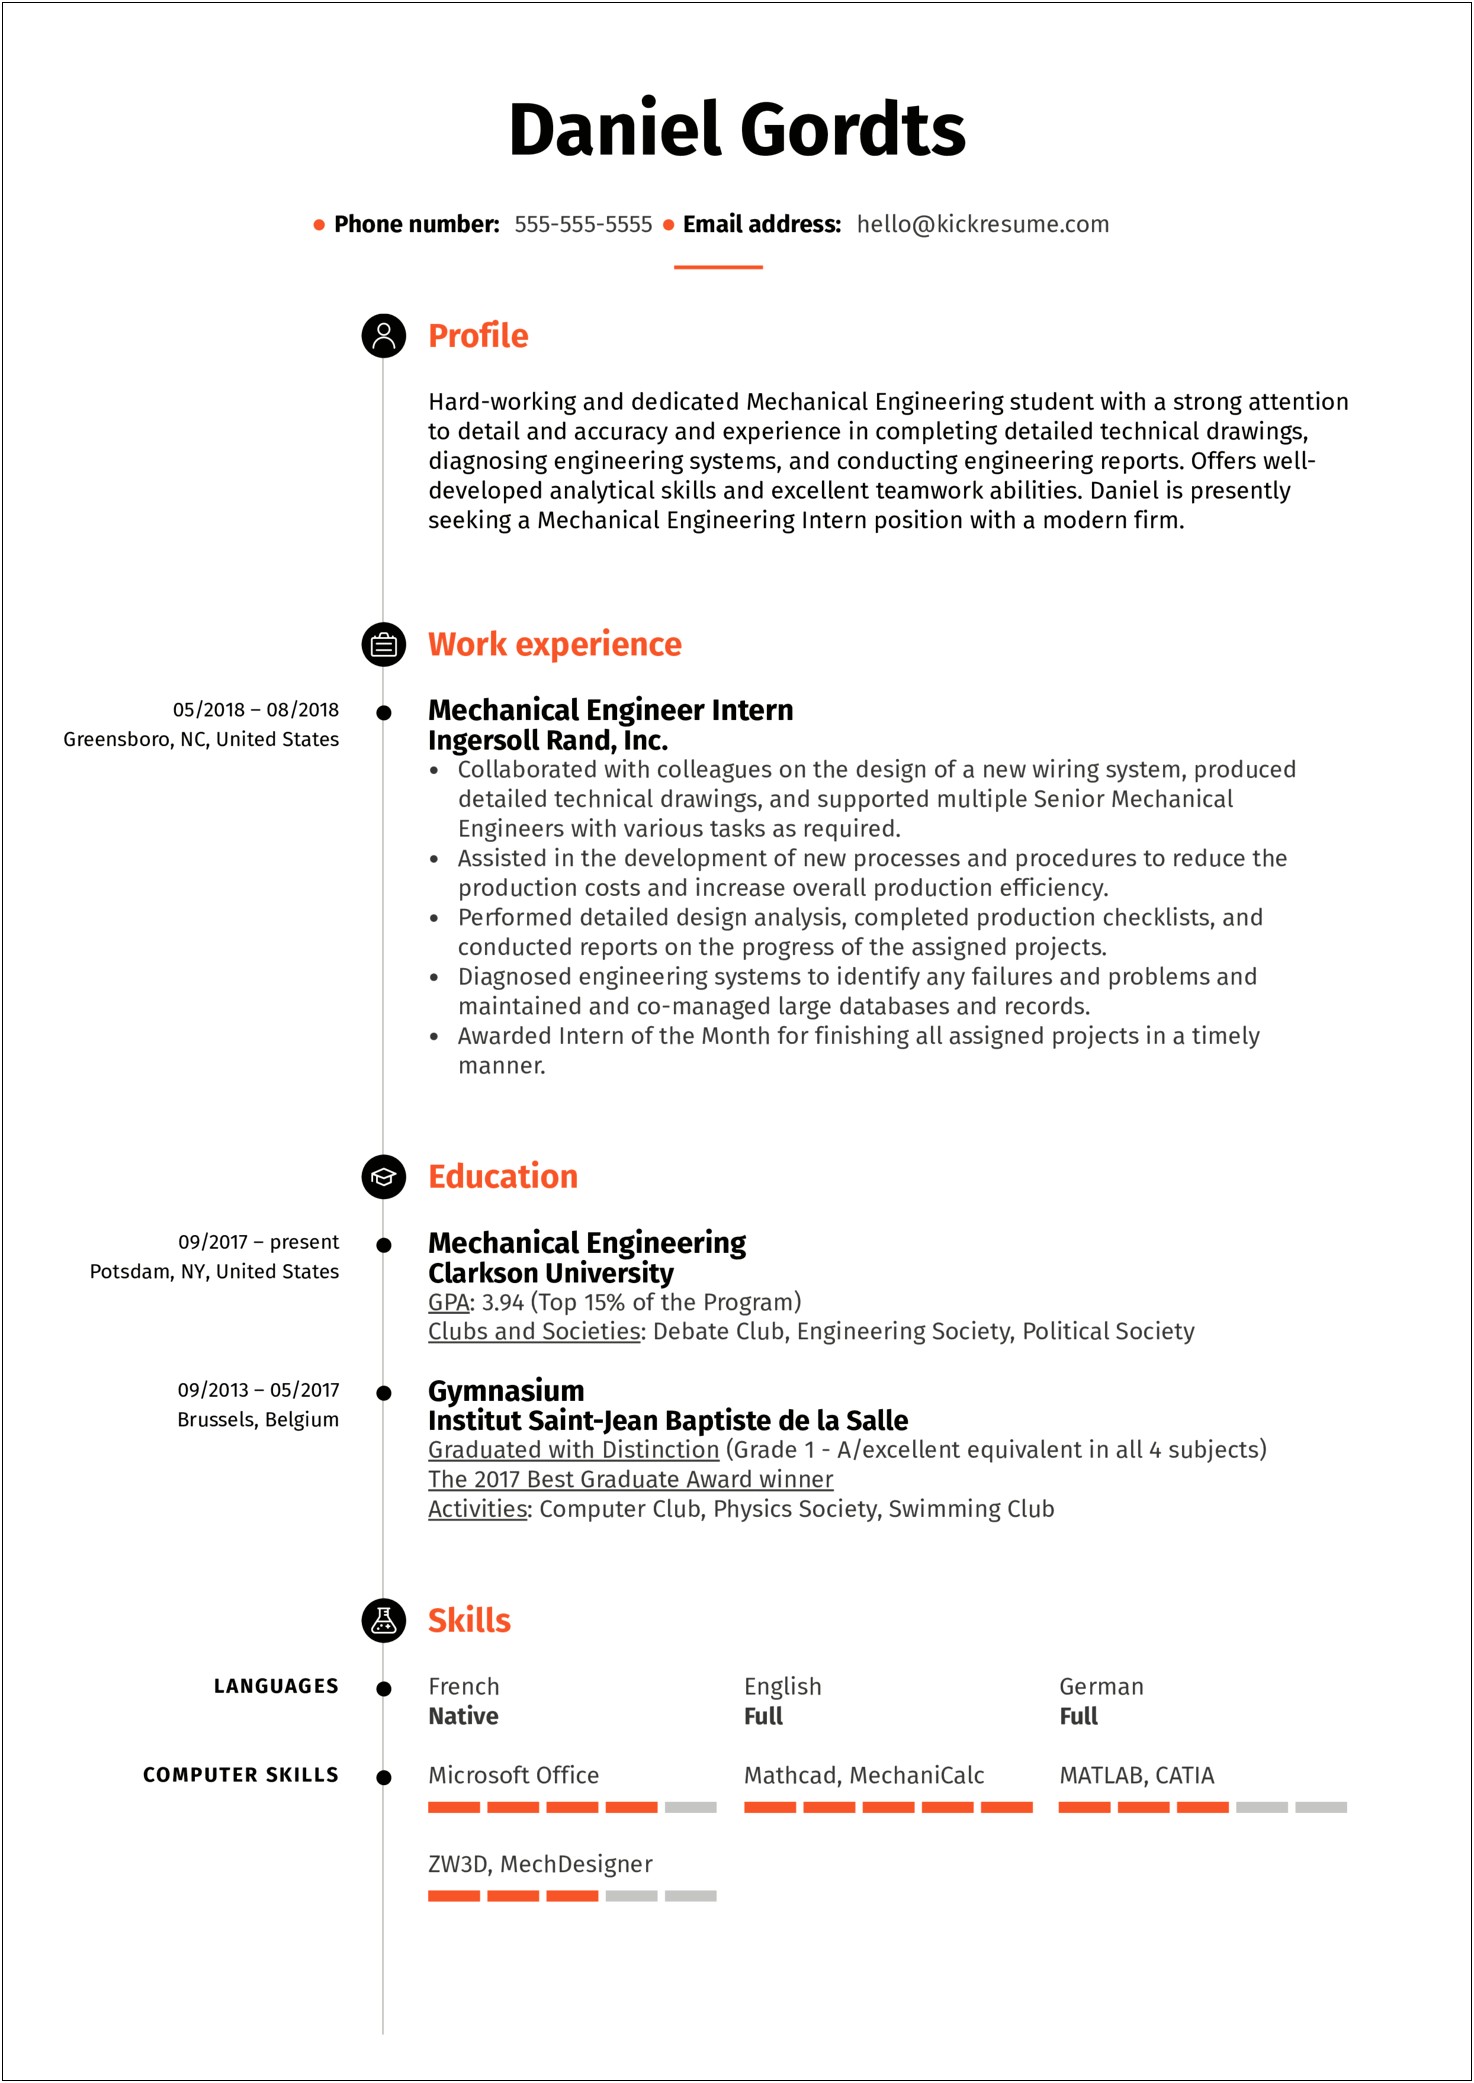 Resume Summary Example For A Mechanical Engineer